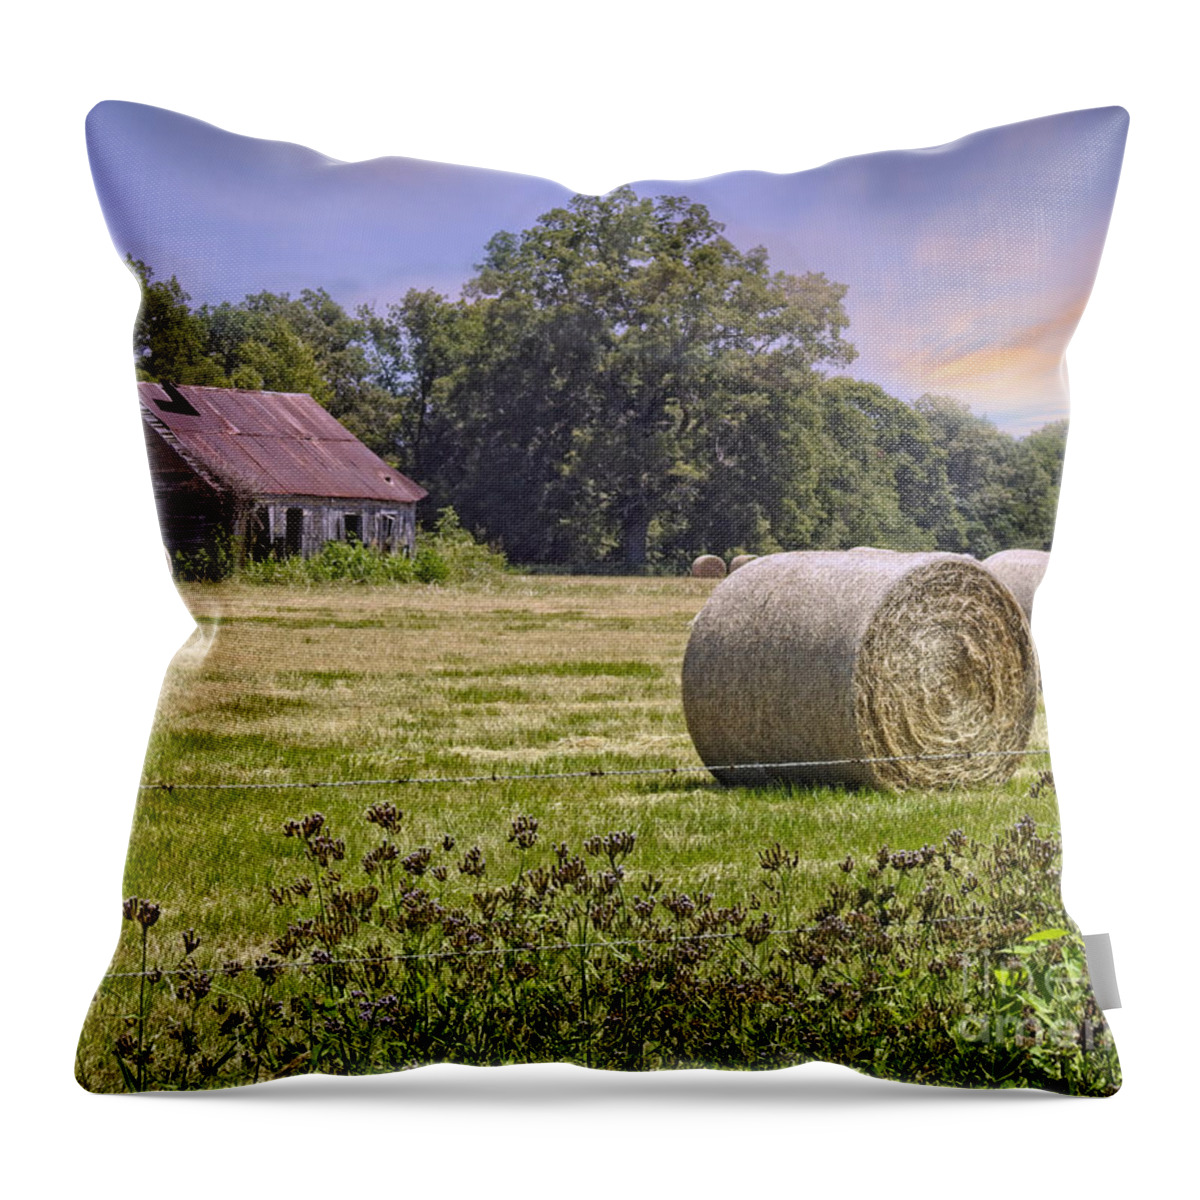 Barn Throw Pillow featuring the photograph Summers Golden Harvest by Ella Kaye Dickey